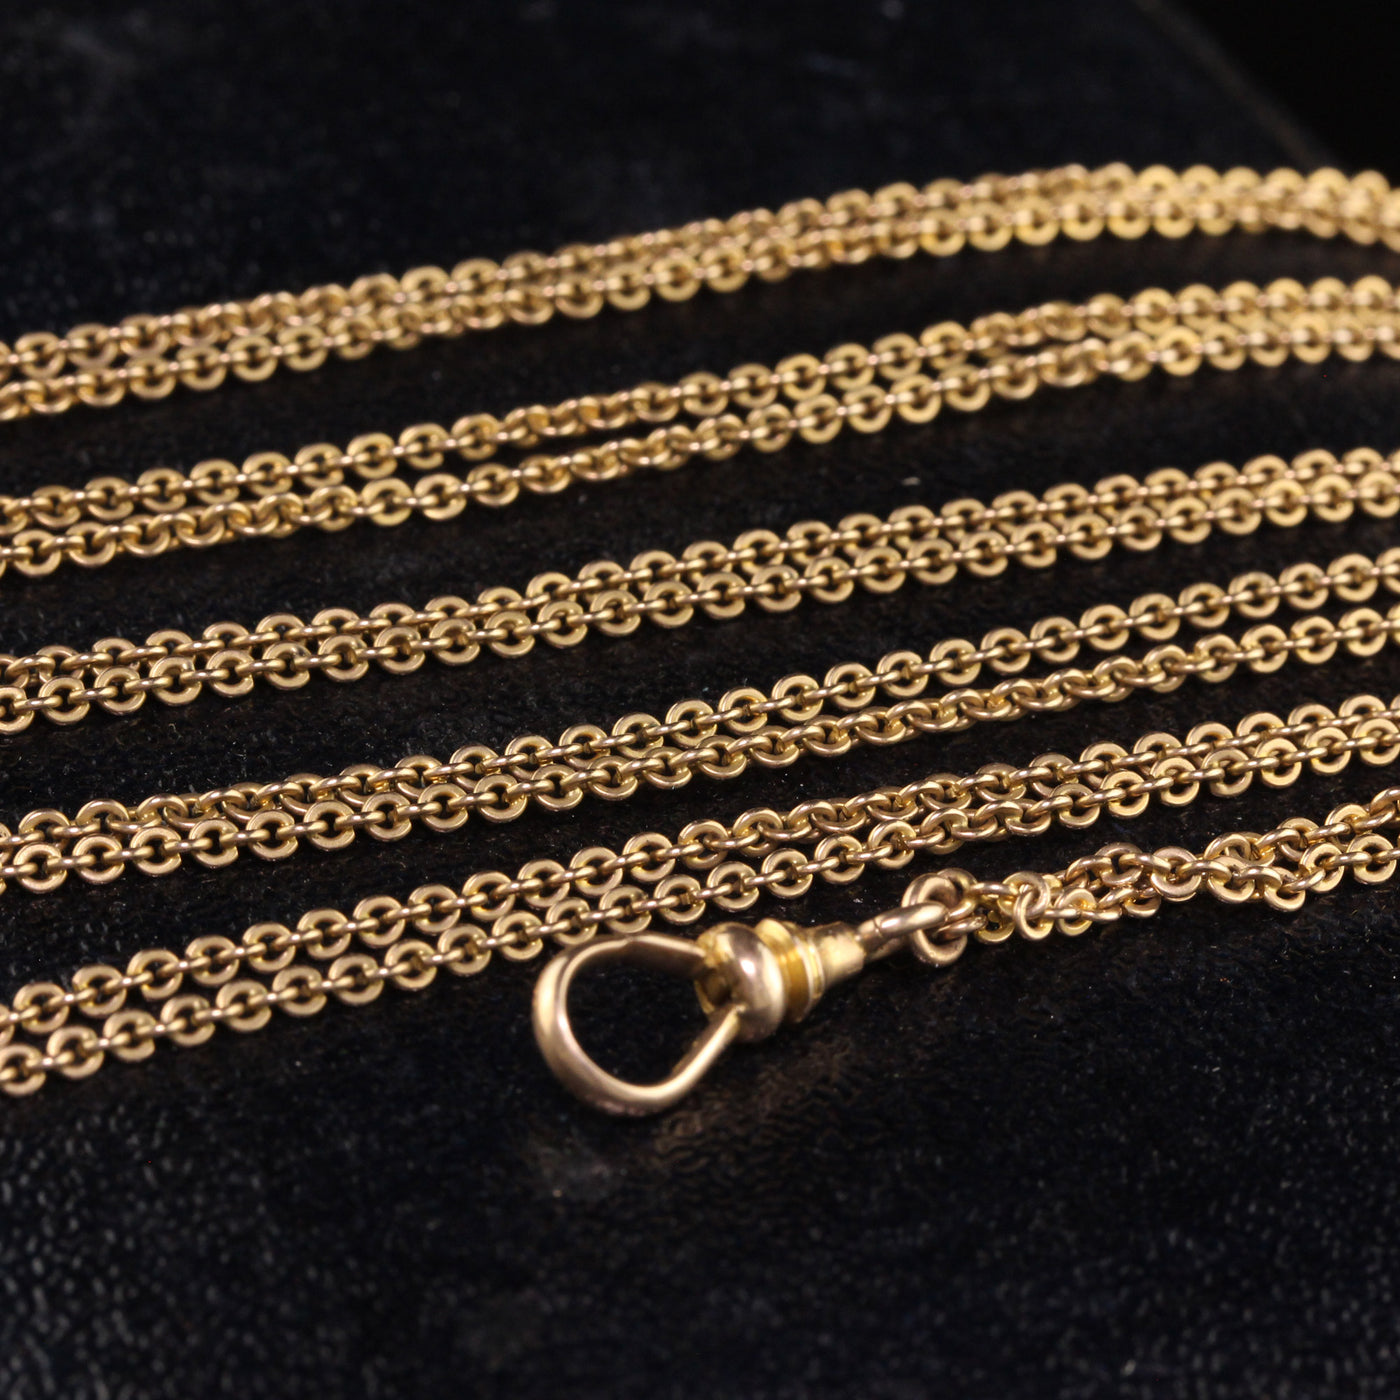 Antique Victorian 14K Yellow Gold Cable Link Chain Slider Necklace - 50 inches